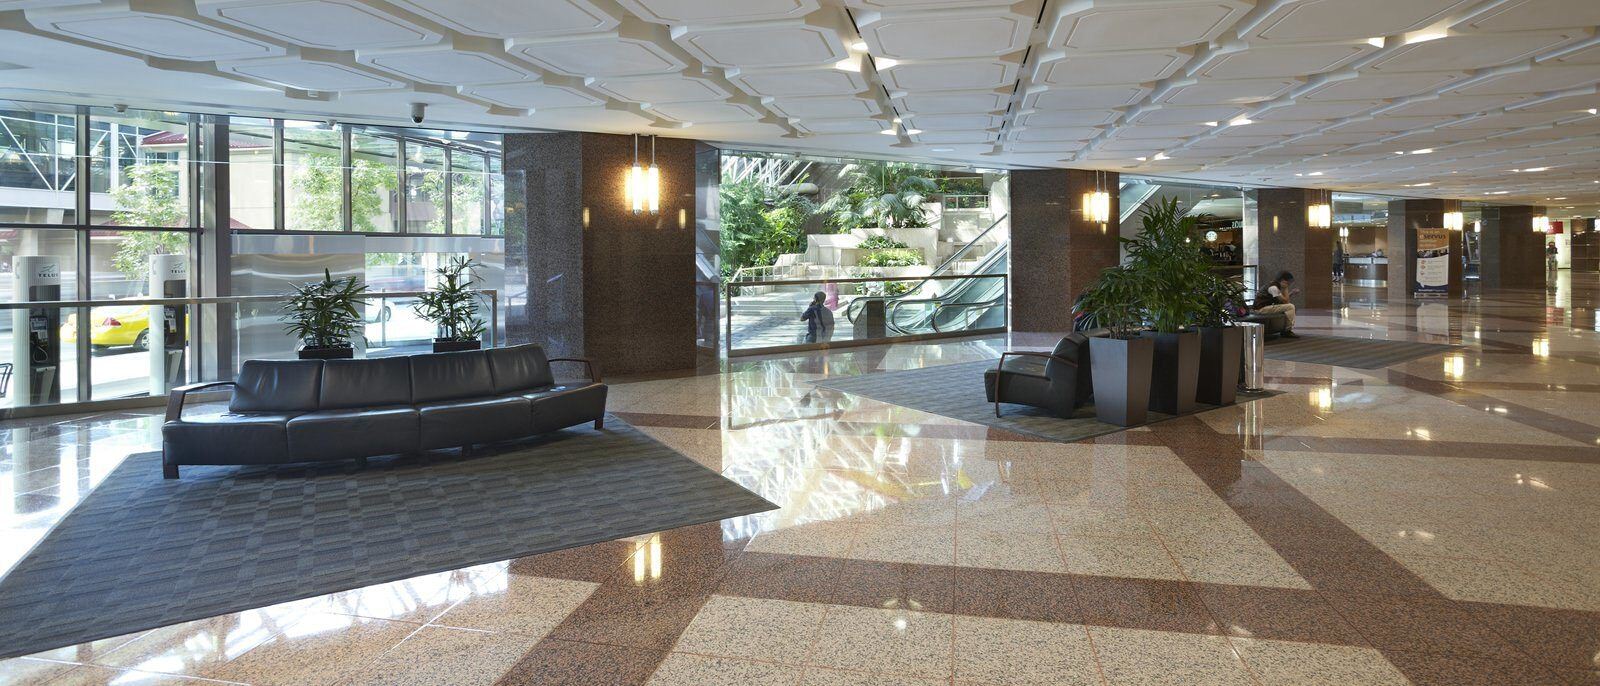 A lobby of a large building that has area rugs and couches scattered around it for people to sit.